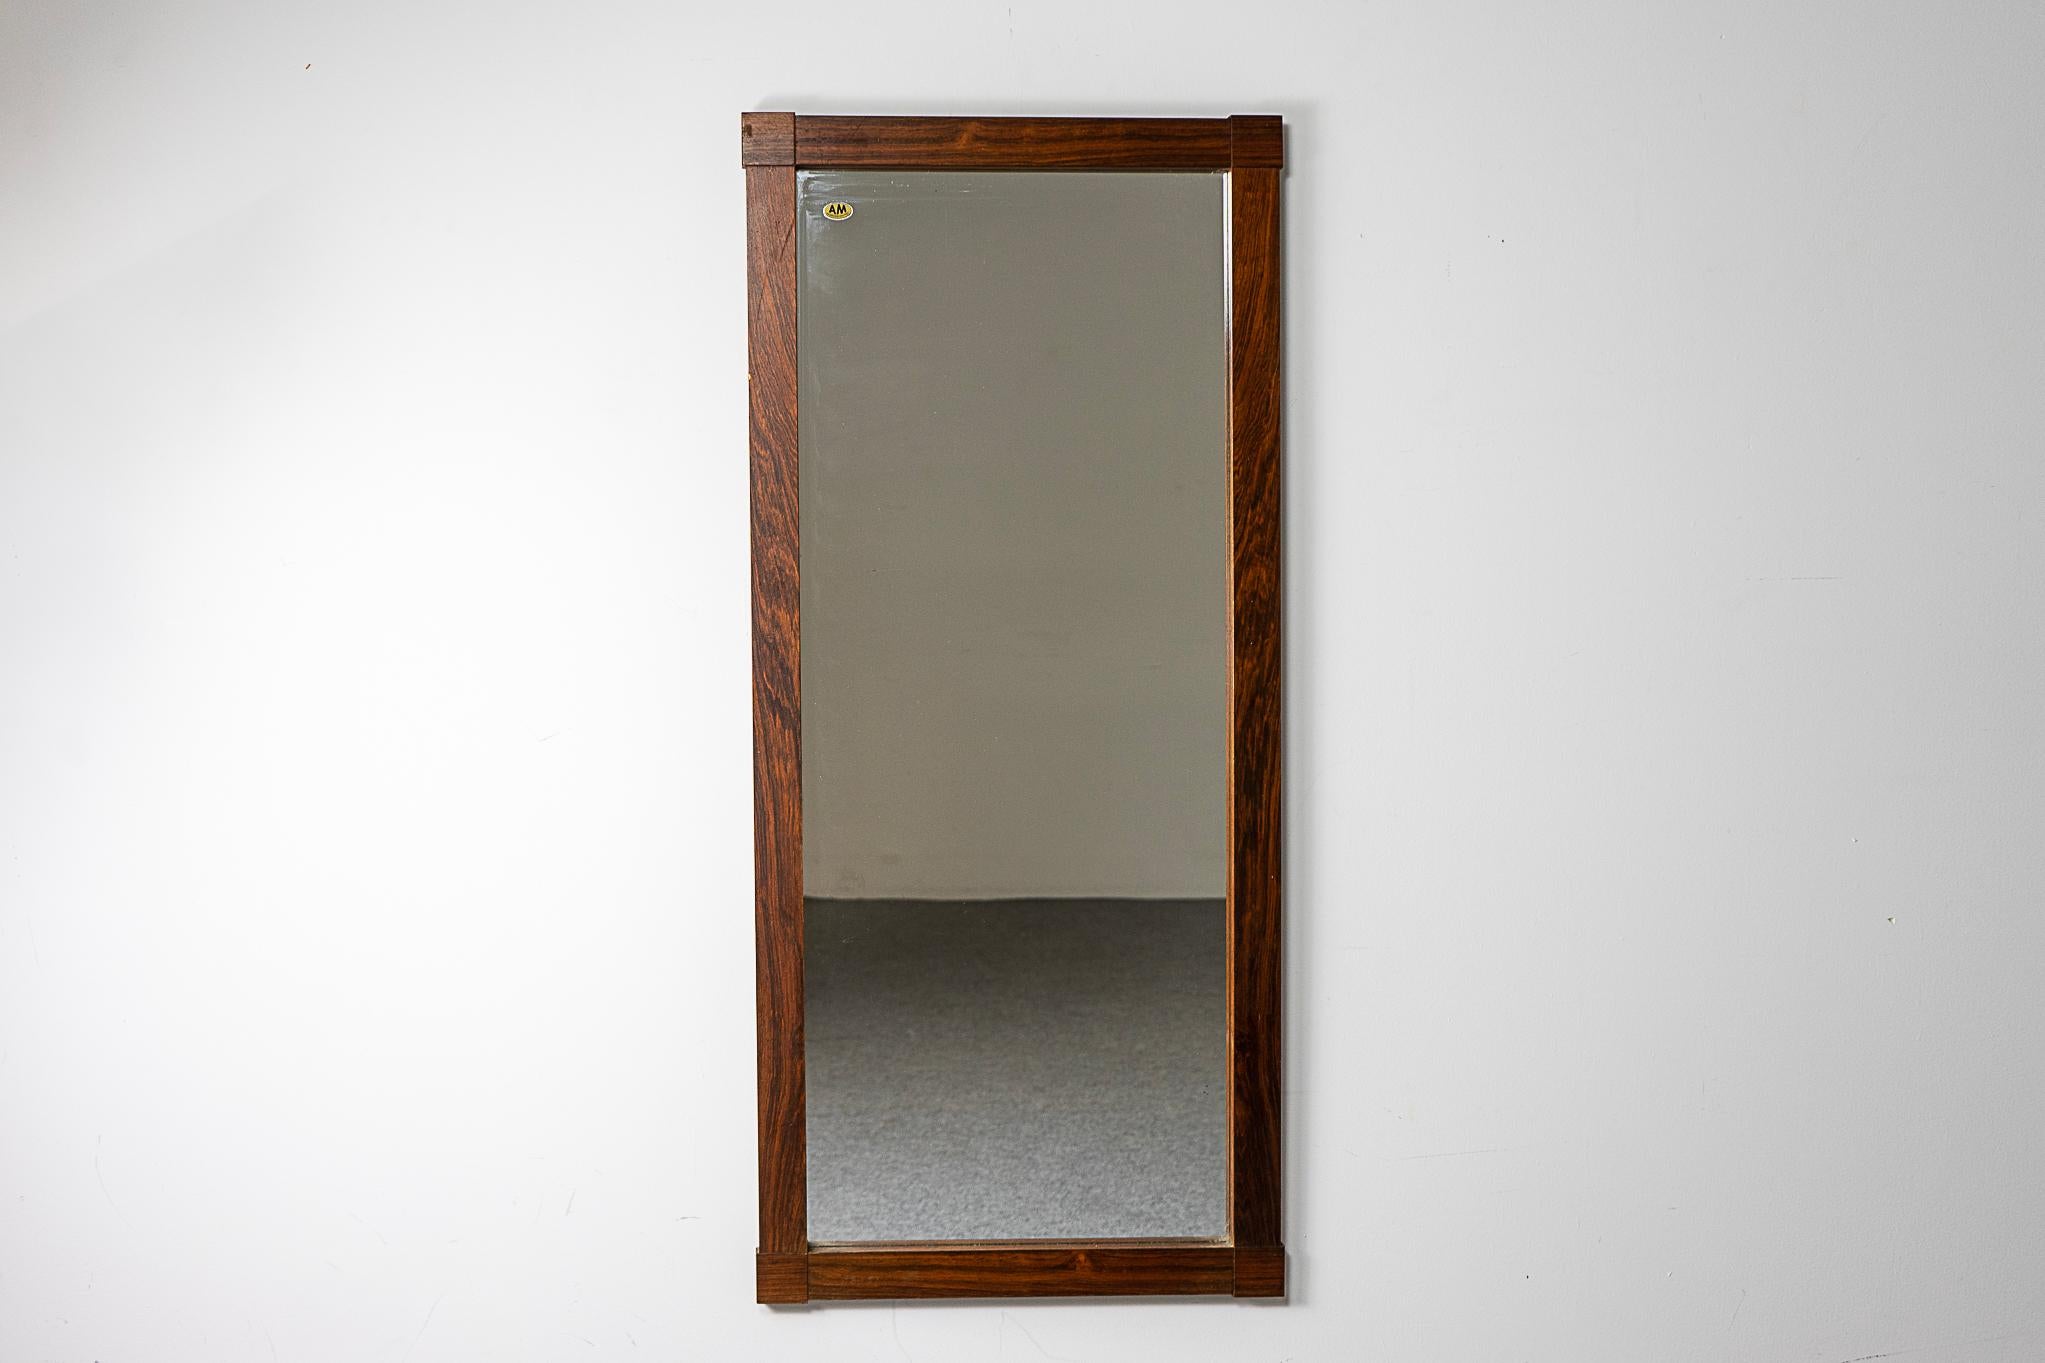 Rosewood Danish mirror, circa 1960's. Slim design with unique corners. Perfect dimensions for hanging near the door to check yourself before heading out.

Please inquire for international shipping rates.